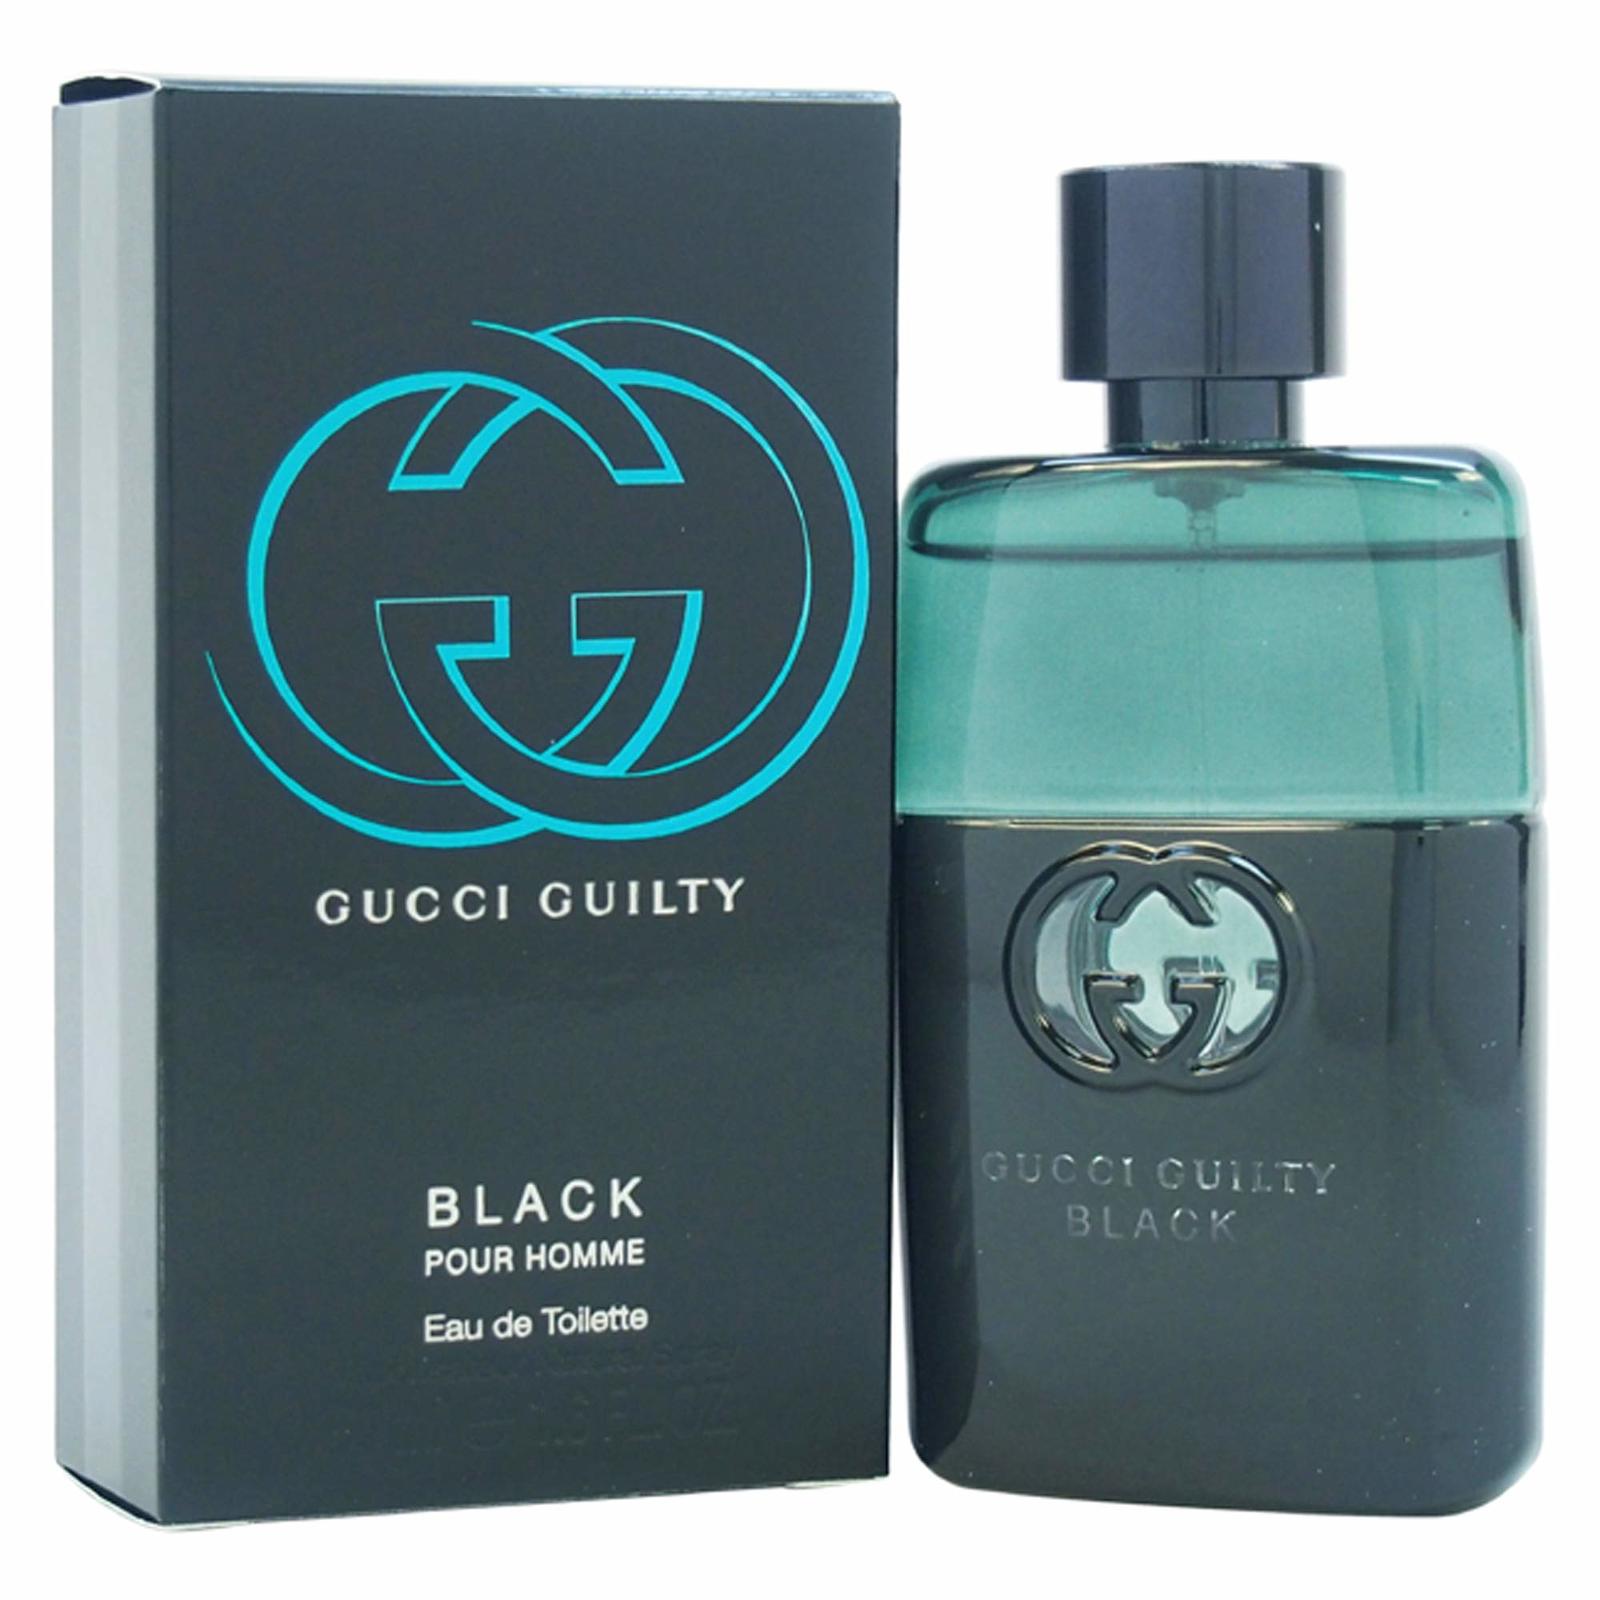 Gucci Guilty Black For Men 1.6 oz EDT Spray By Gucci - $78.21 - $84.10